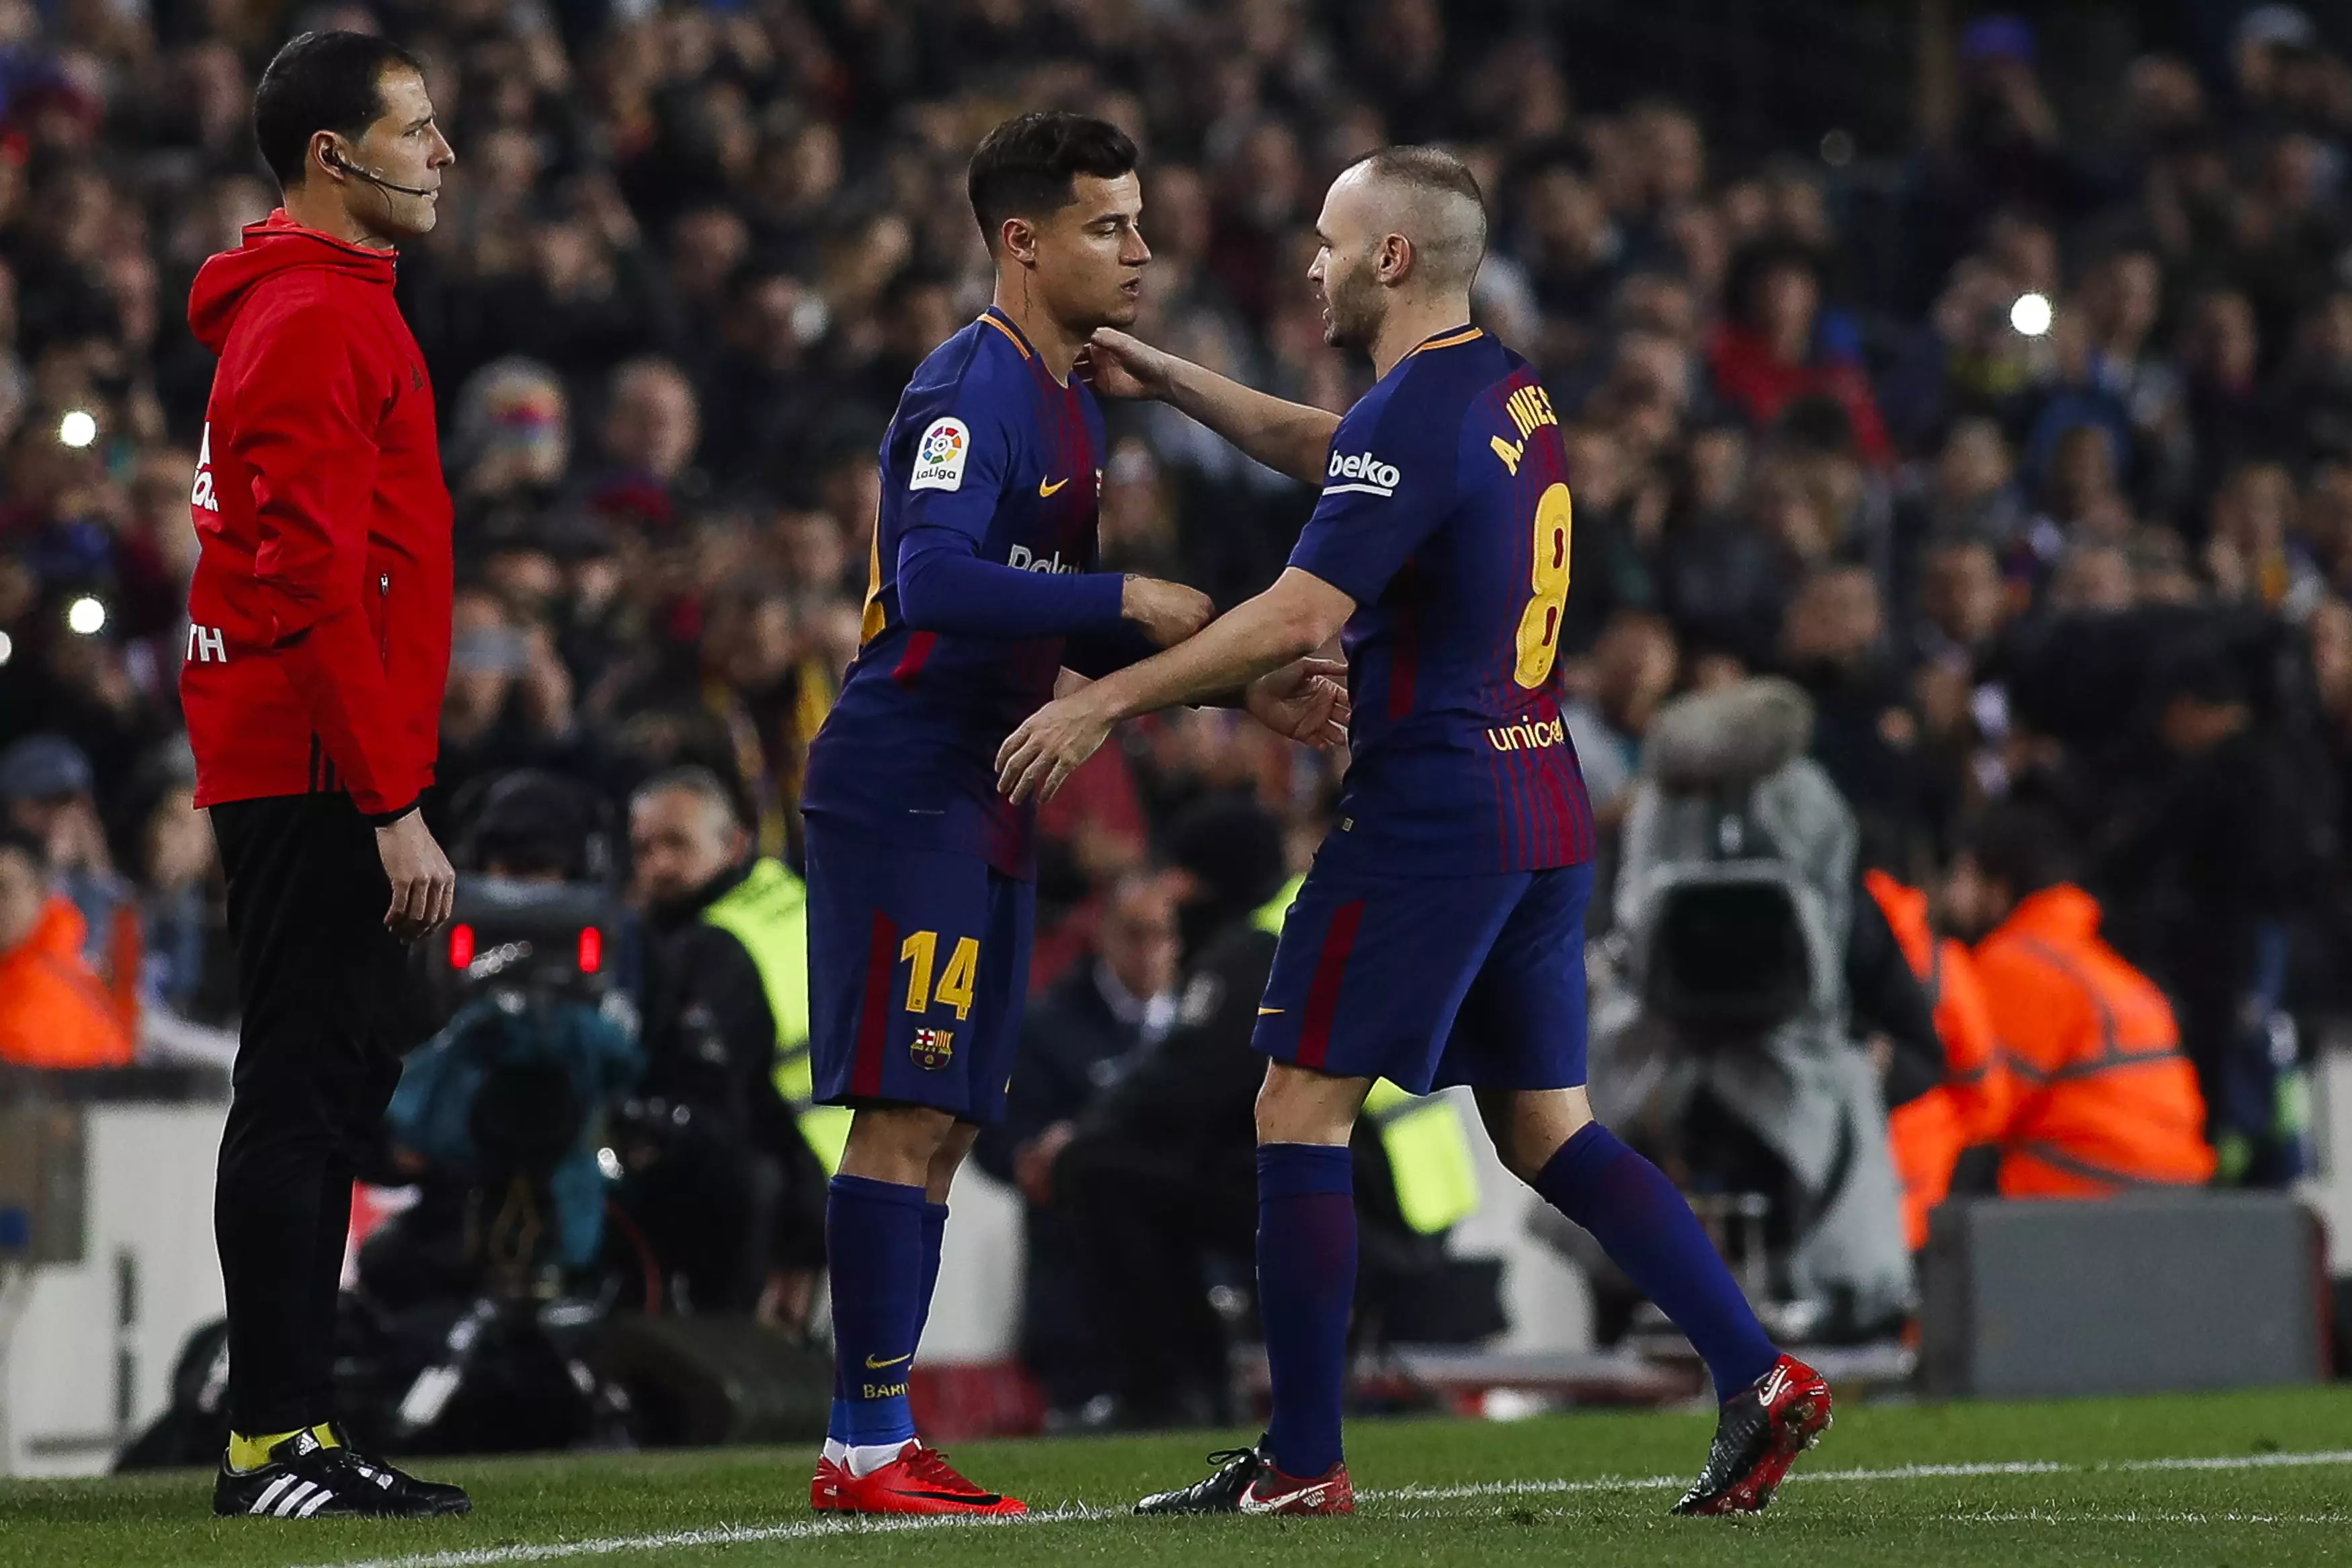 Coutinho on for Iniesta